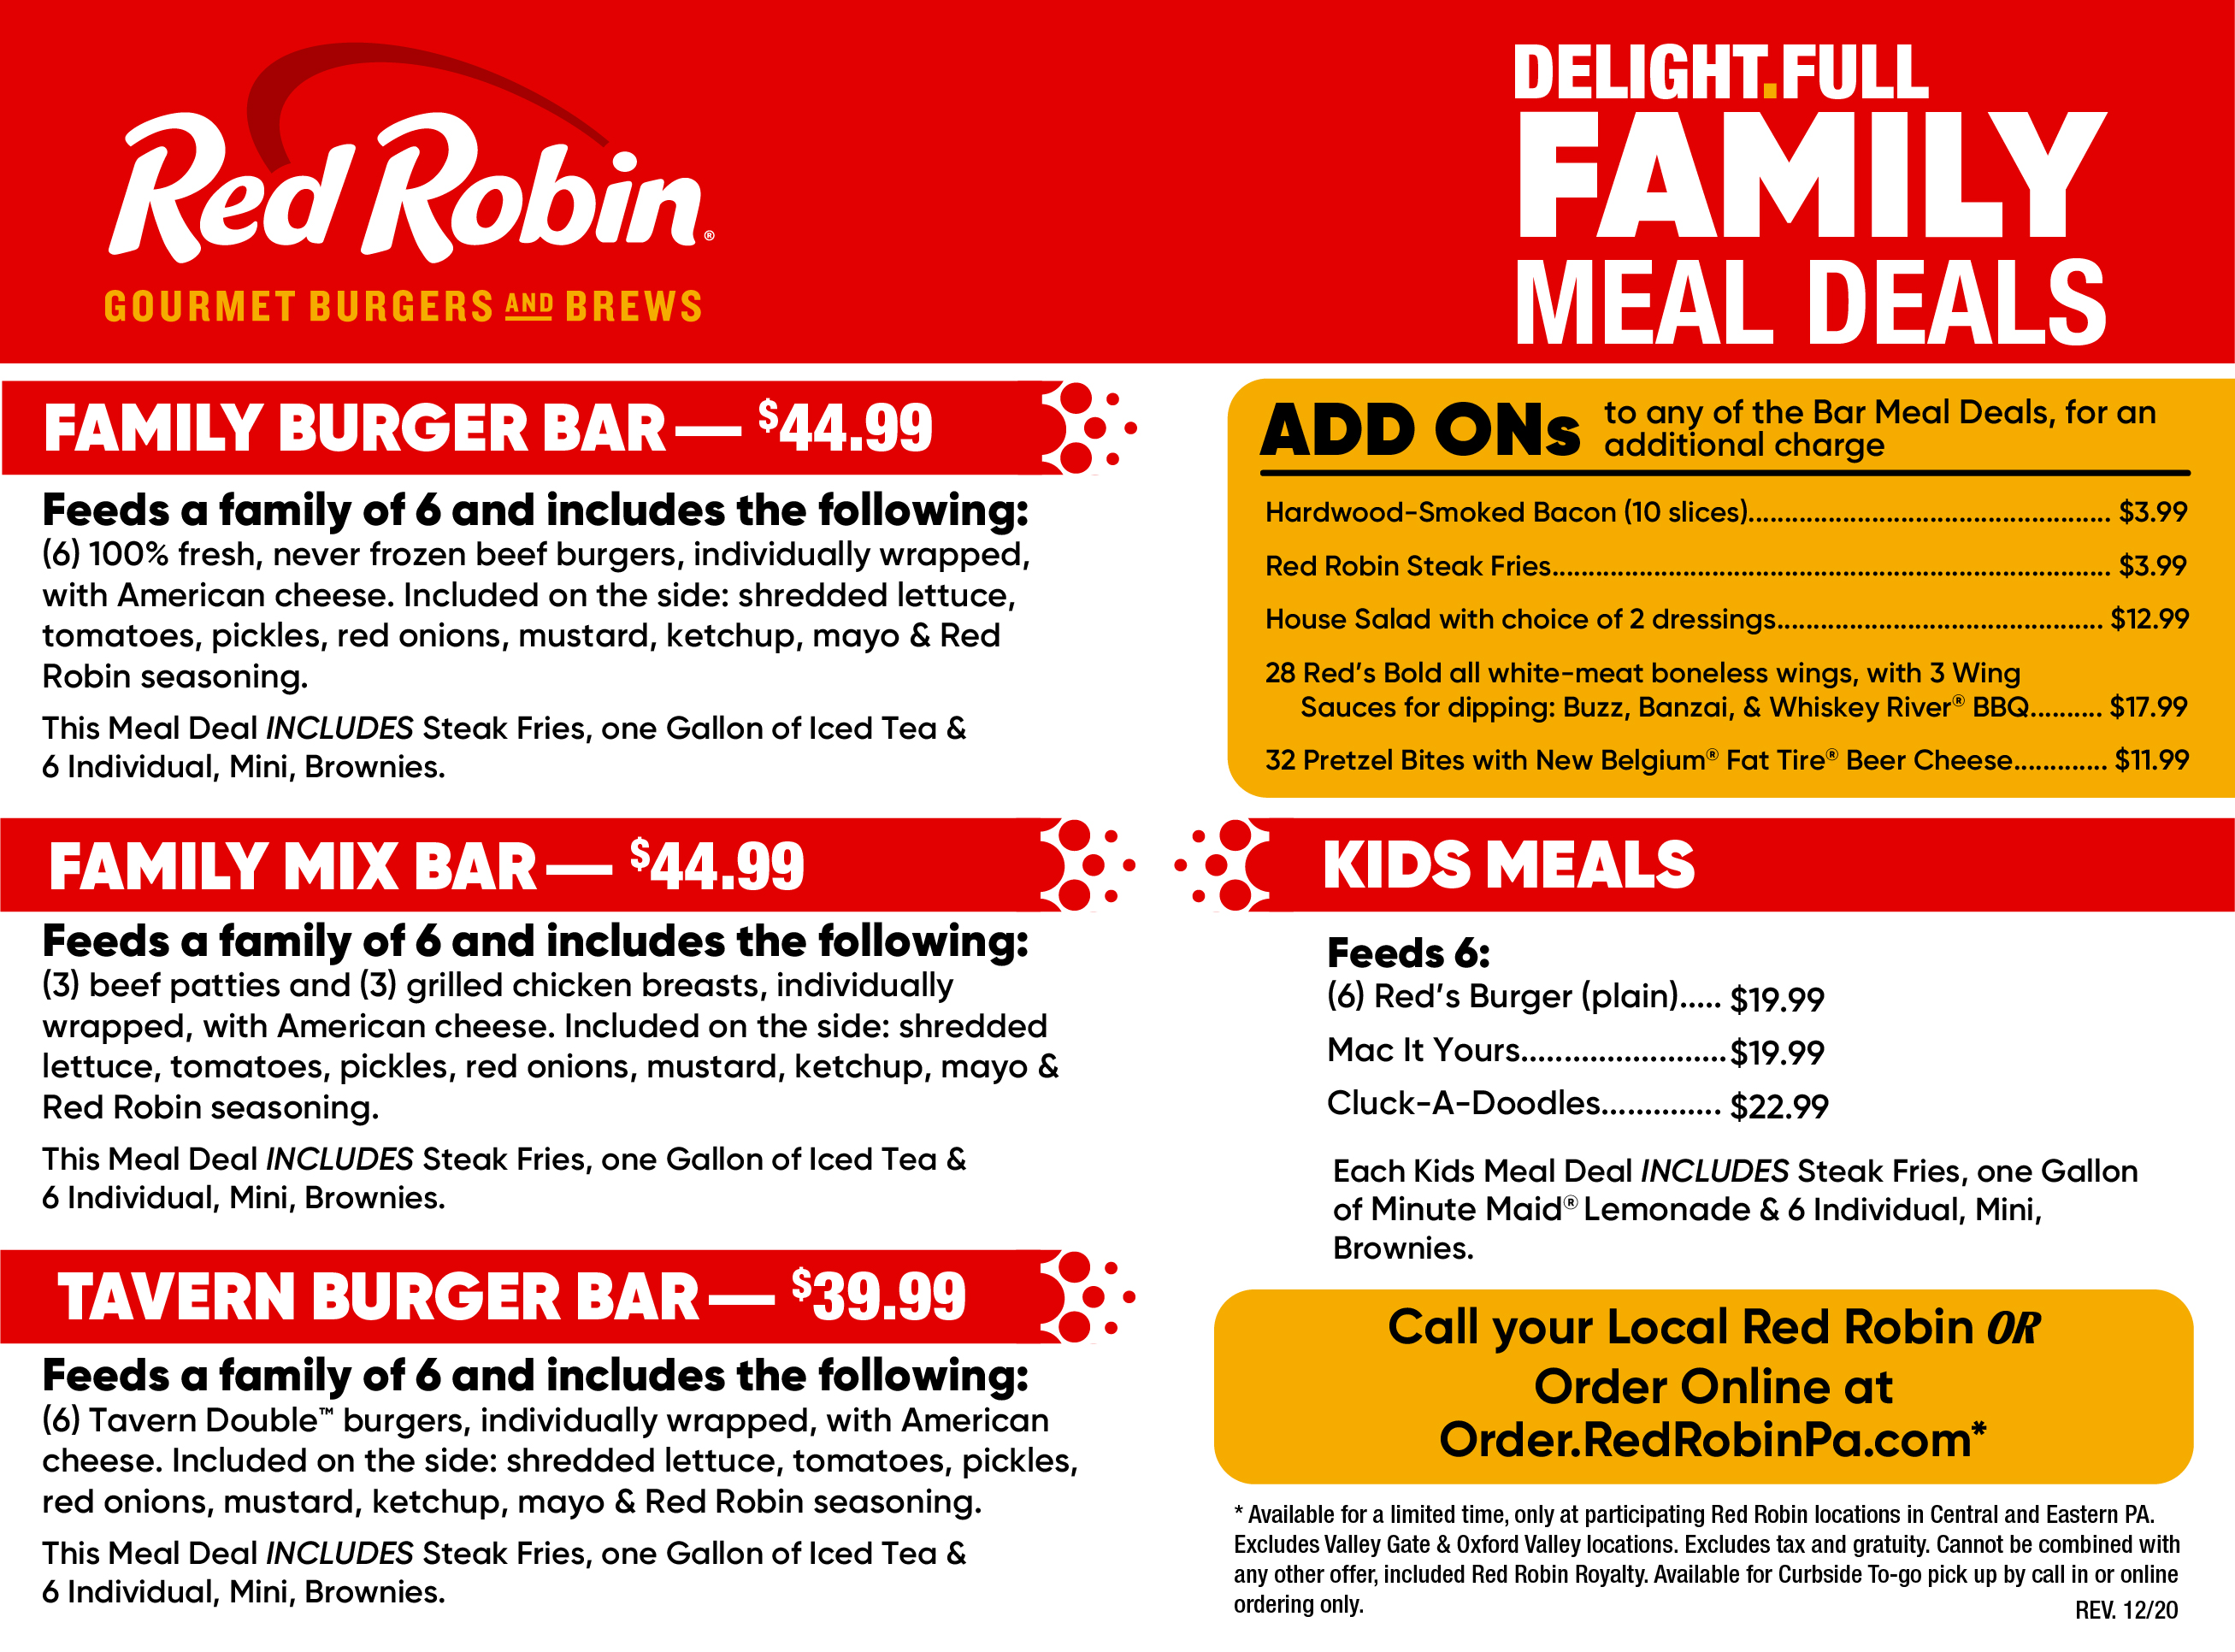 New Red Robin Family Meal Deals at participating location in Central & Eastern PA. New menu as of December 2020.